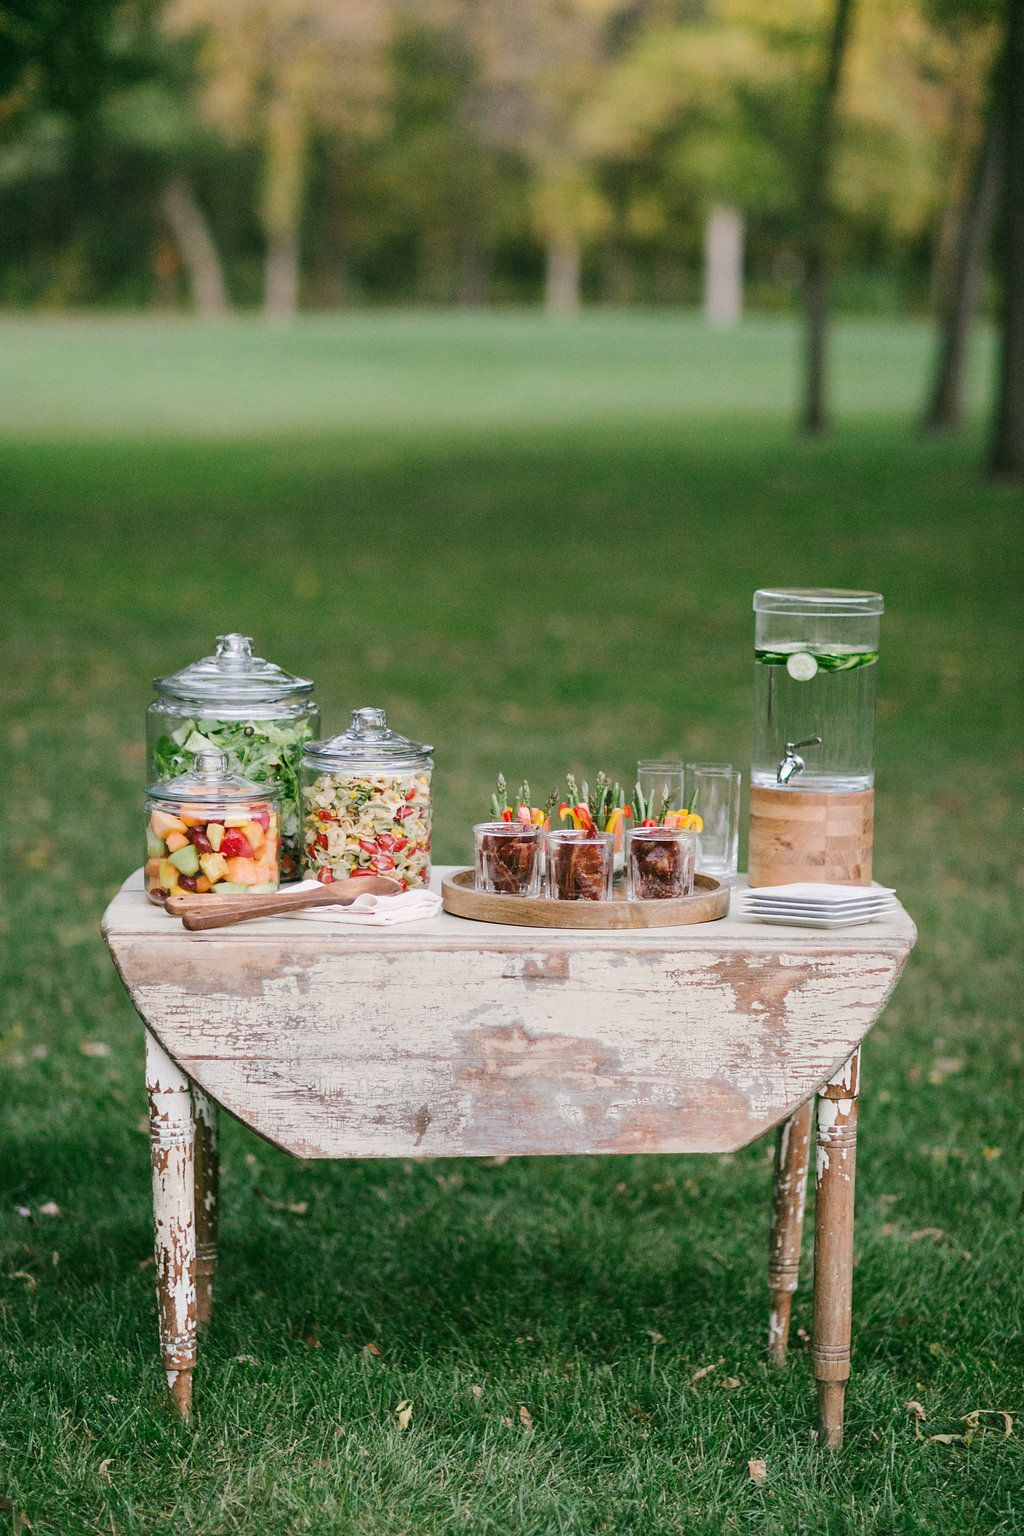 Barbecue Engagement Party Ideas
 Backyard Engagement Party Ideas